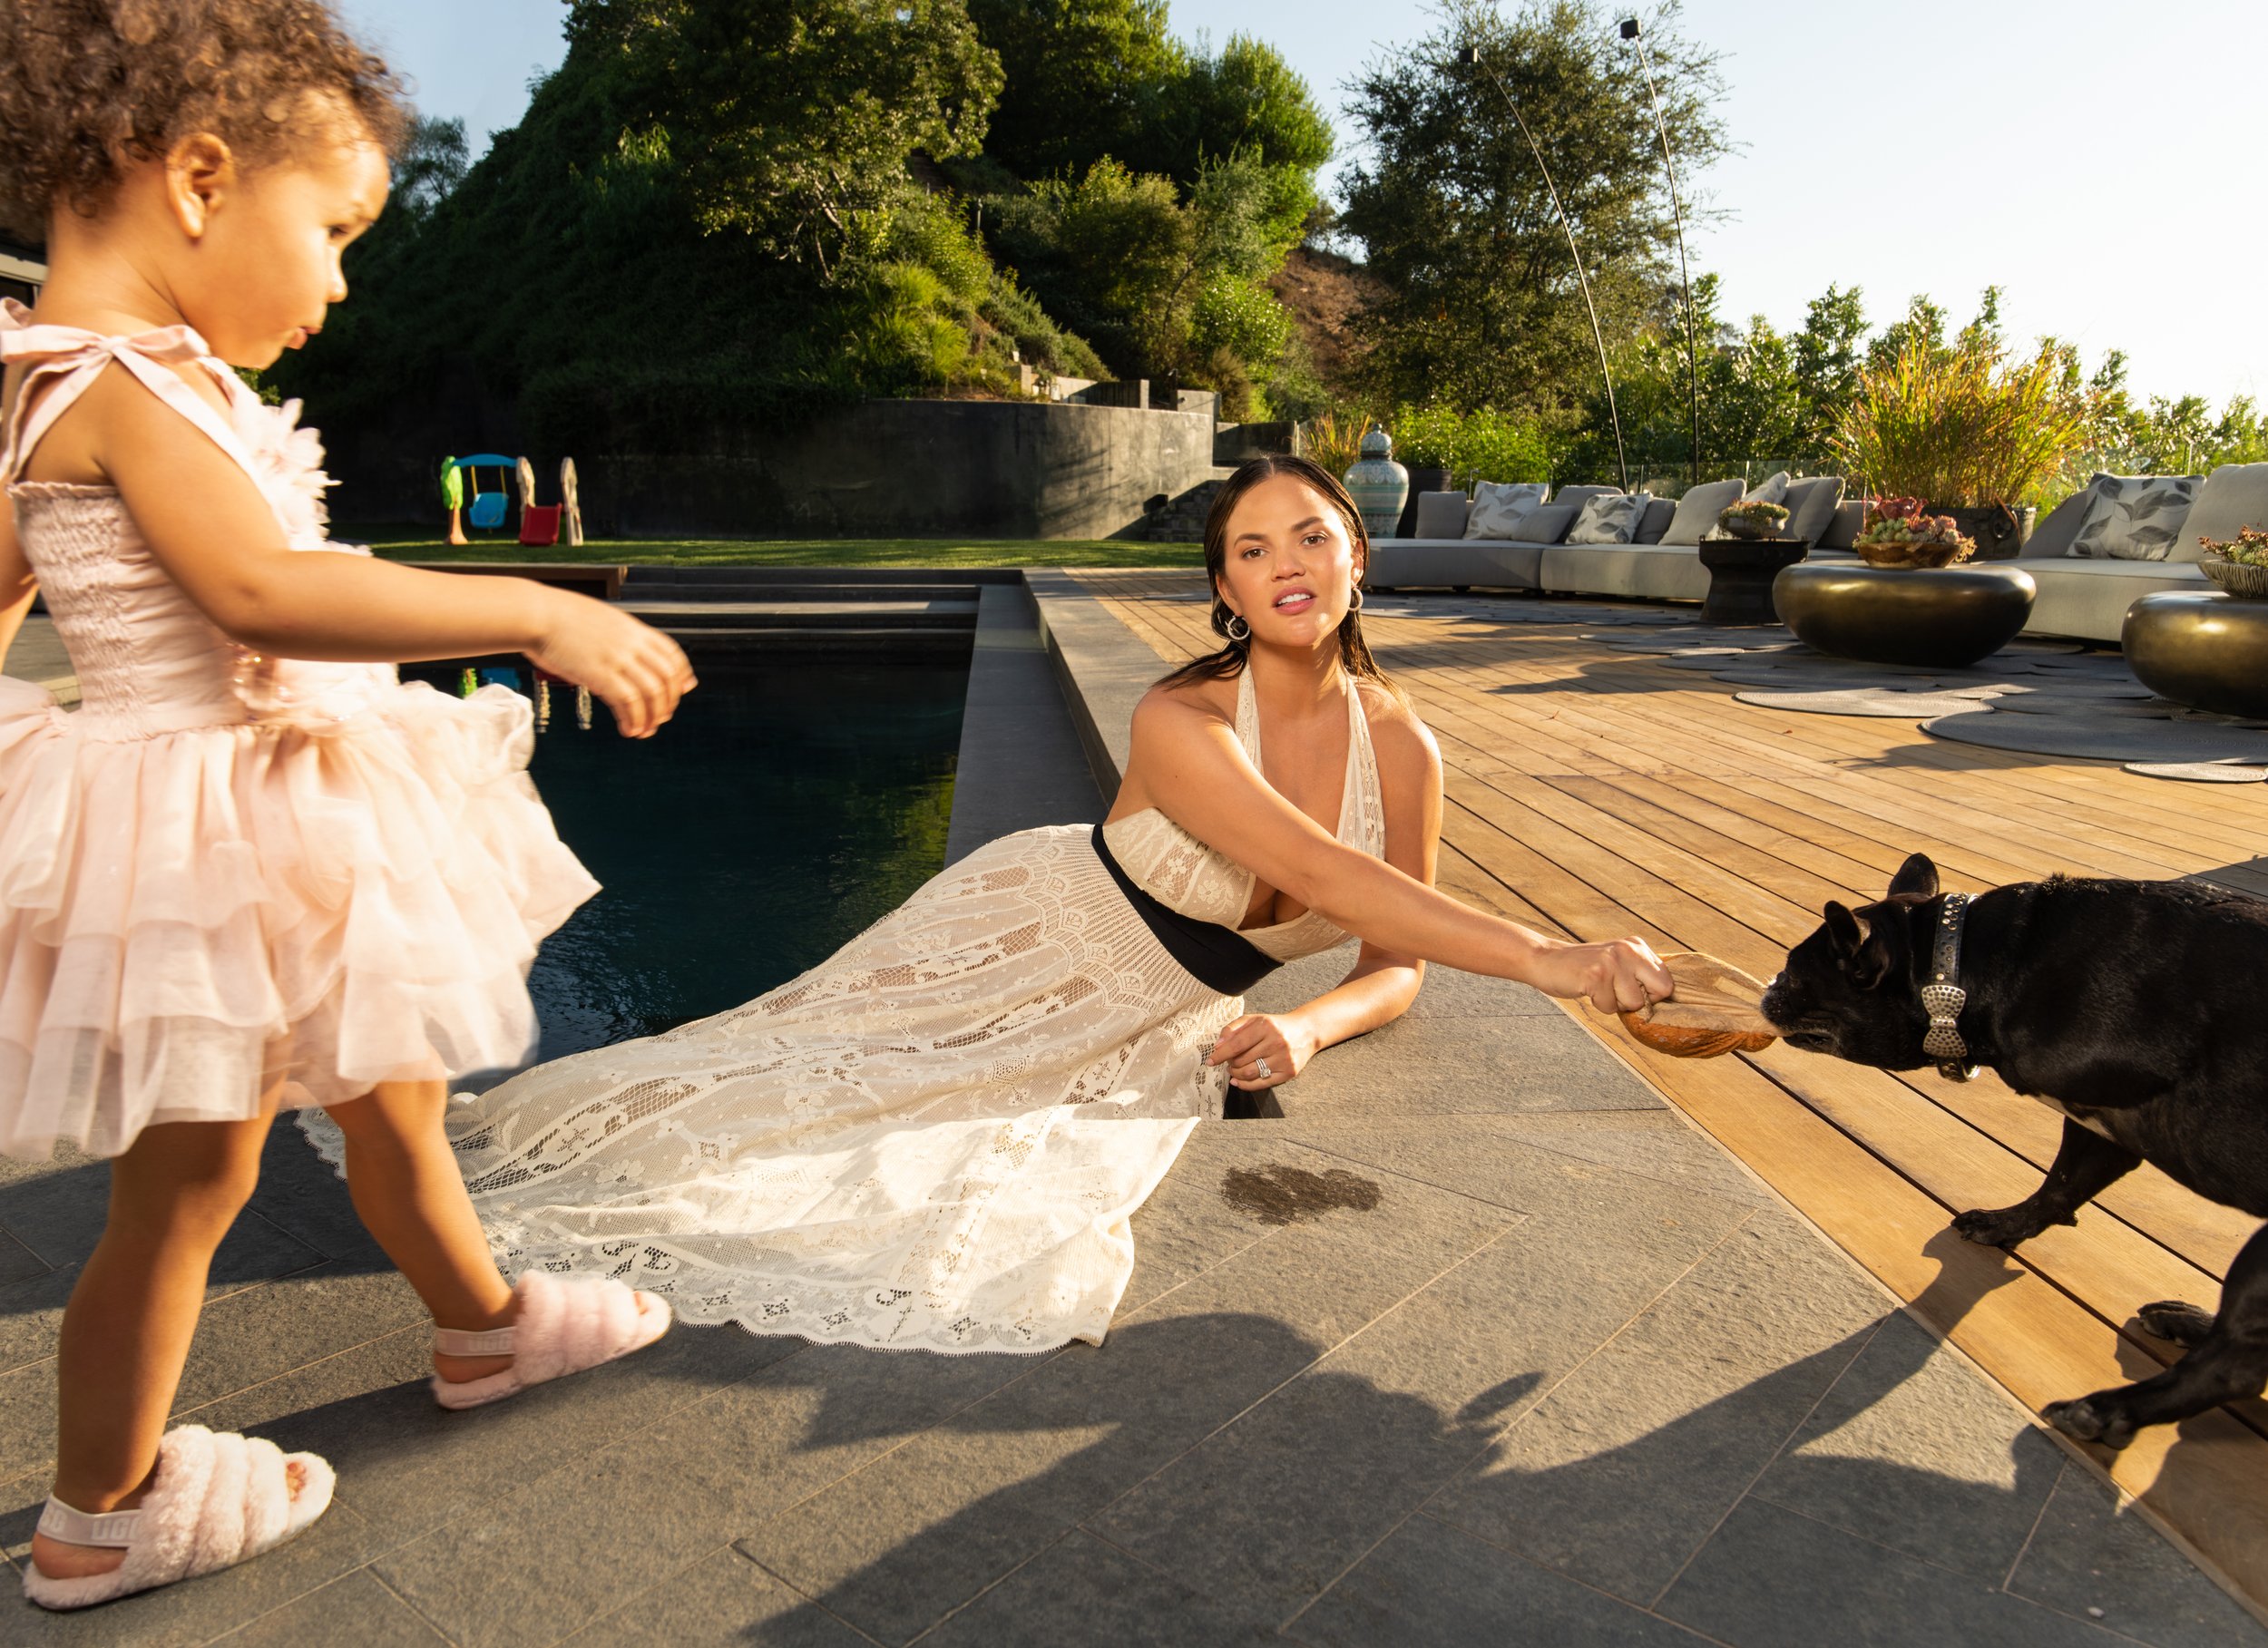 Chrissy Teigen with her daughter Luna, and dog Penny